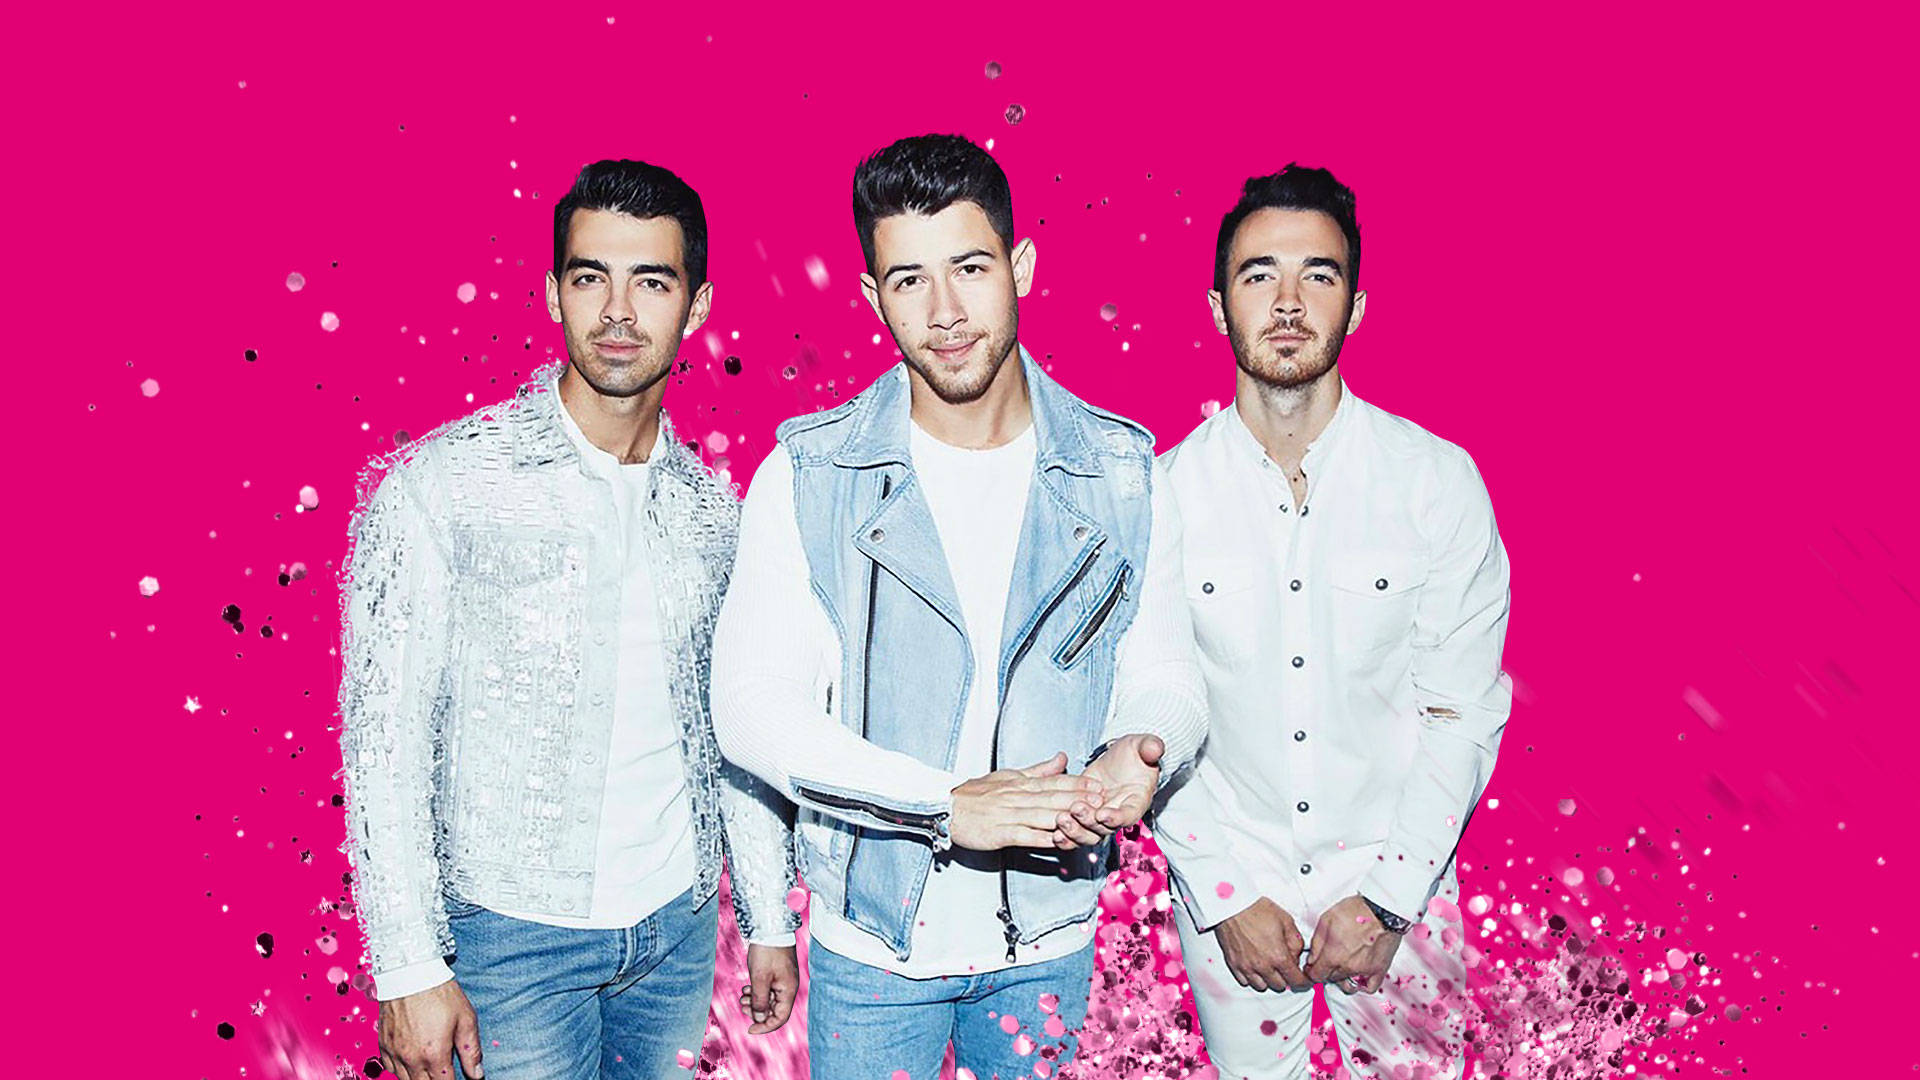 Jonas Brothers Pink Aesthetic Poster Background